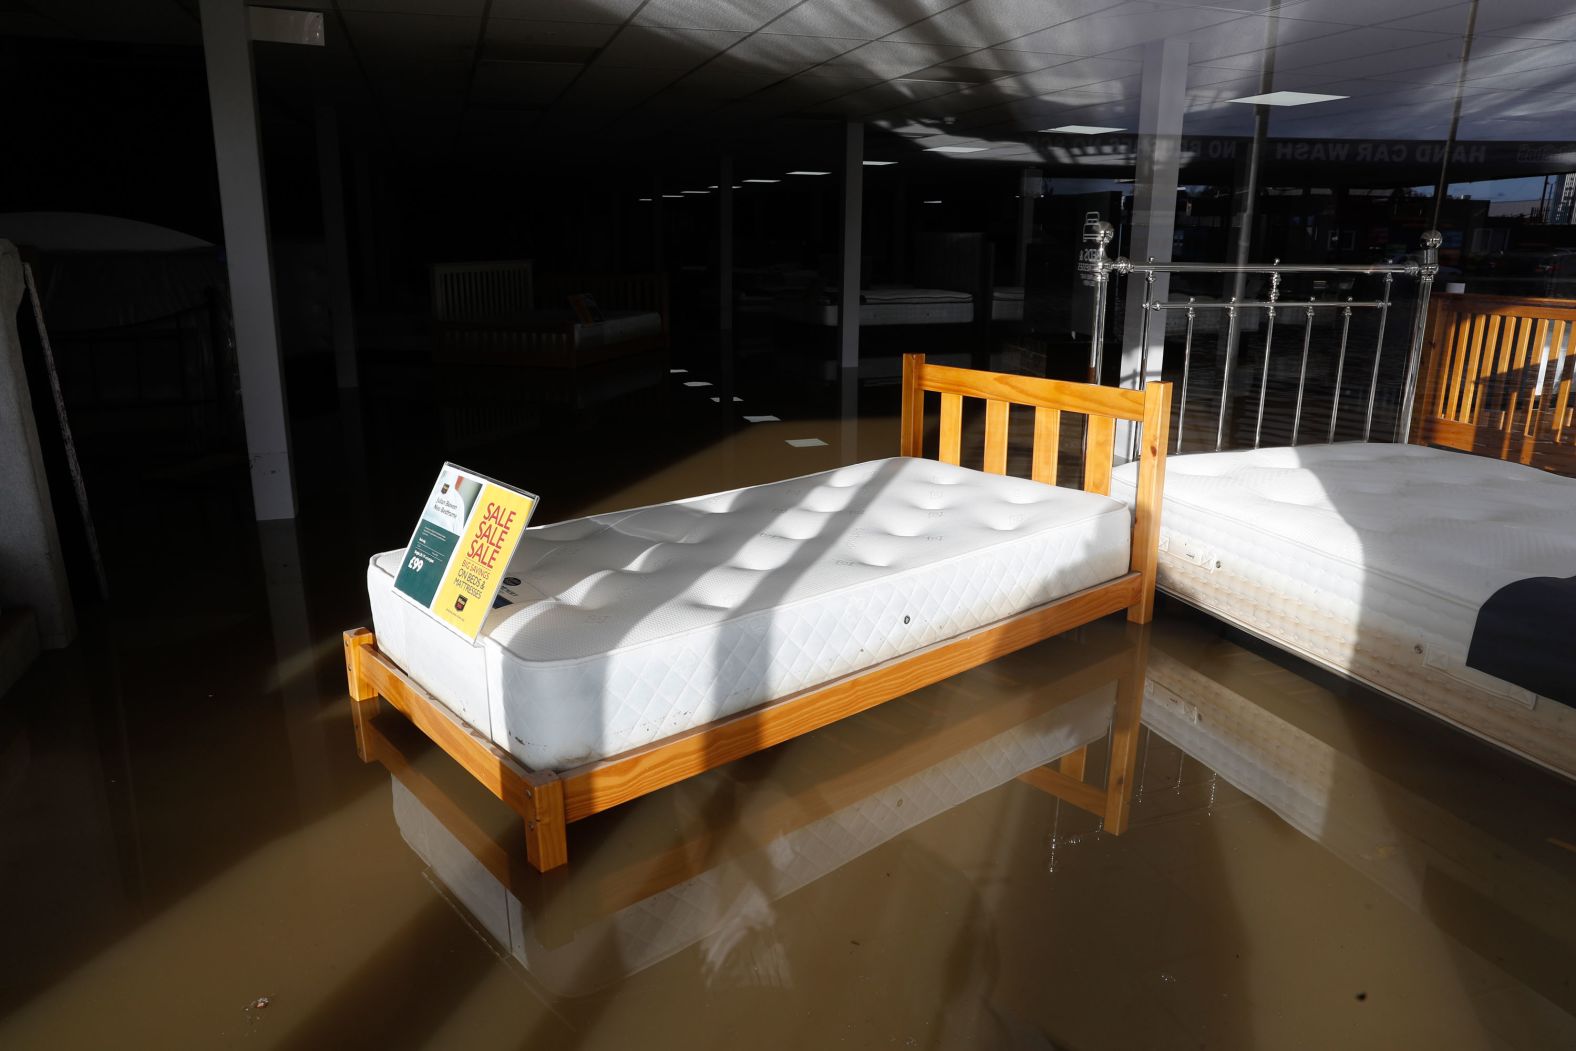 A bed in a flooded shop is seen in Rotherham.